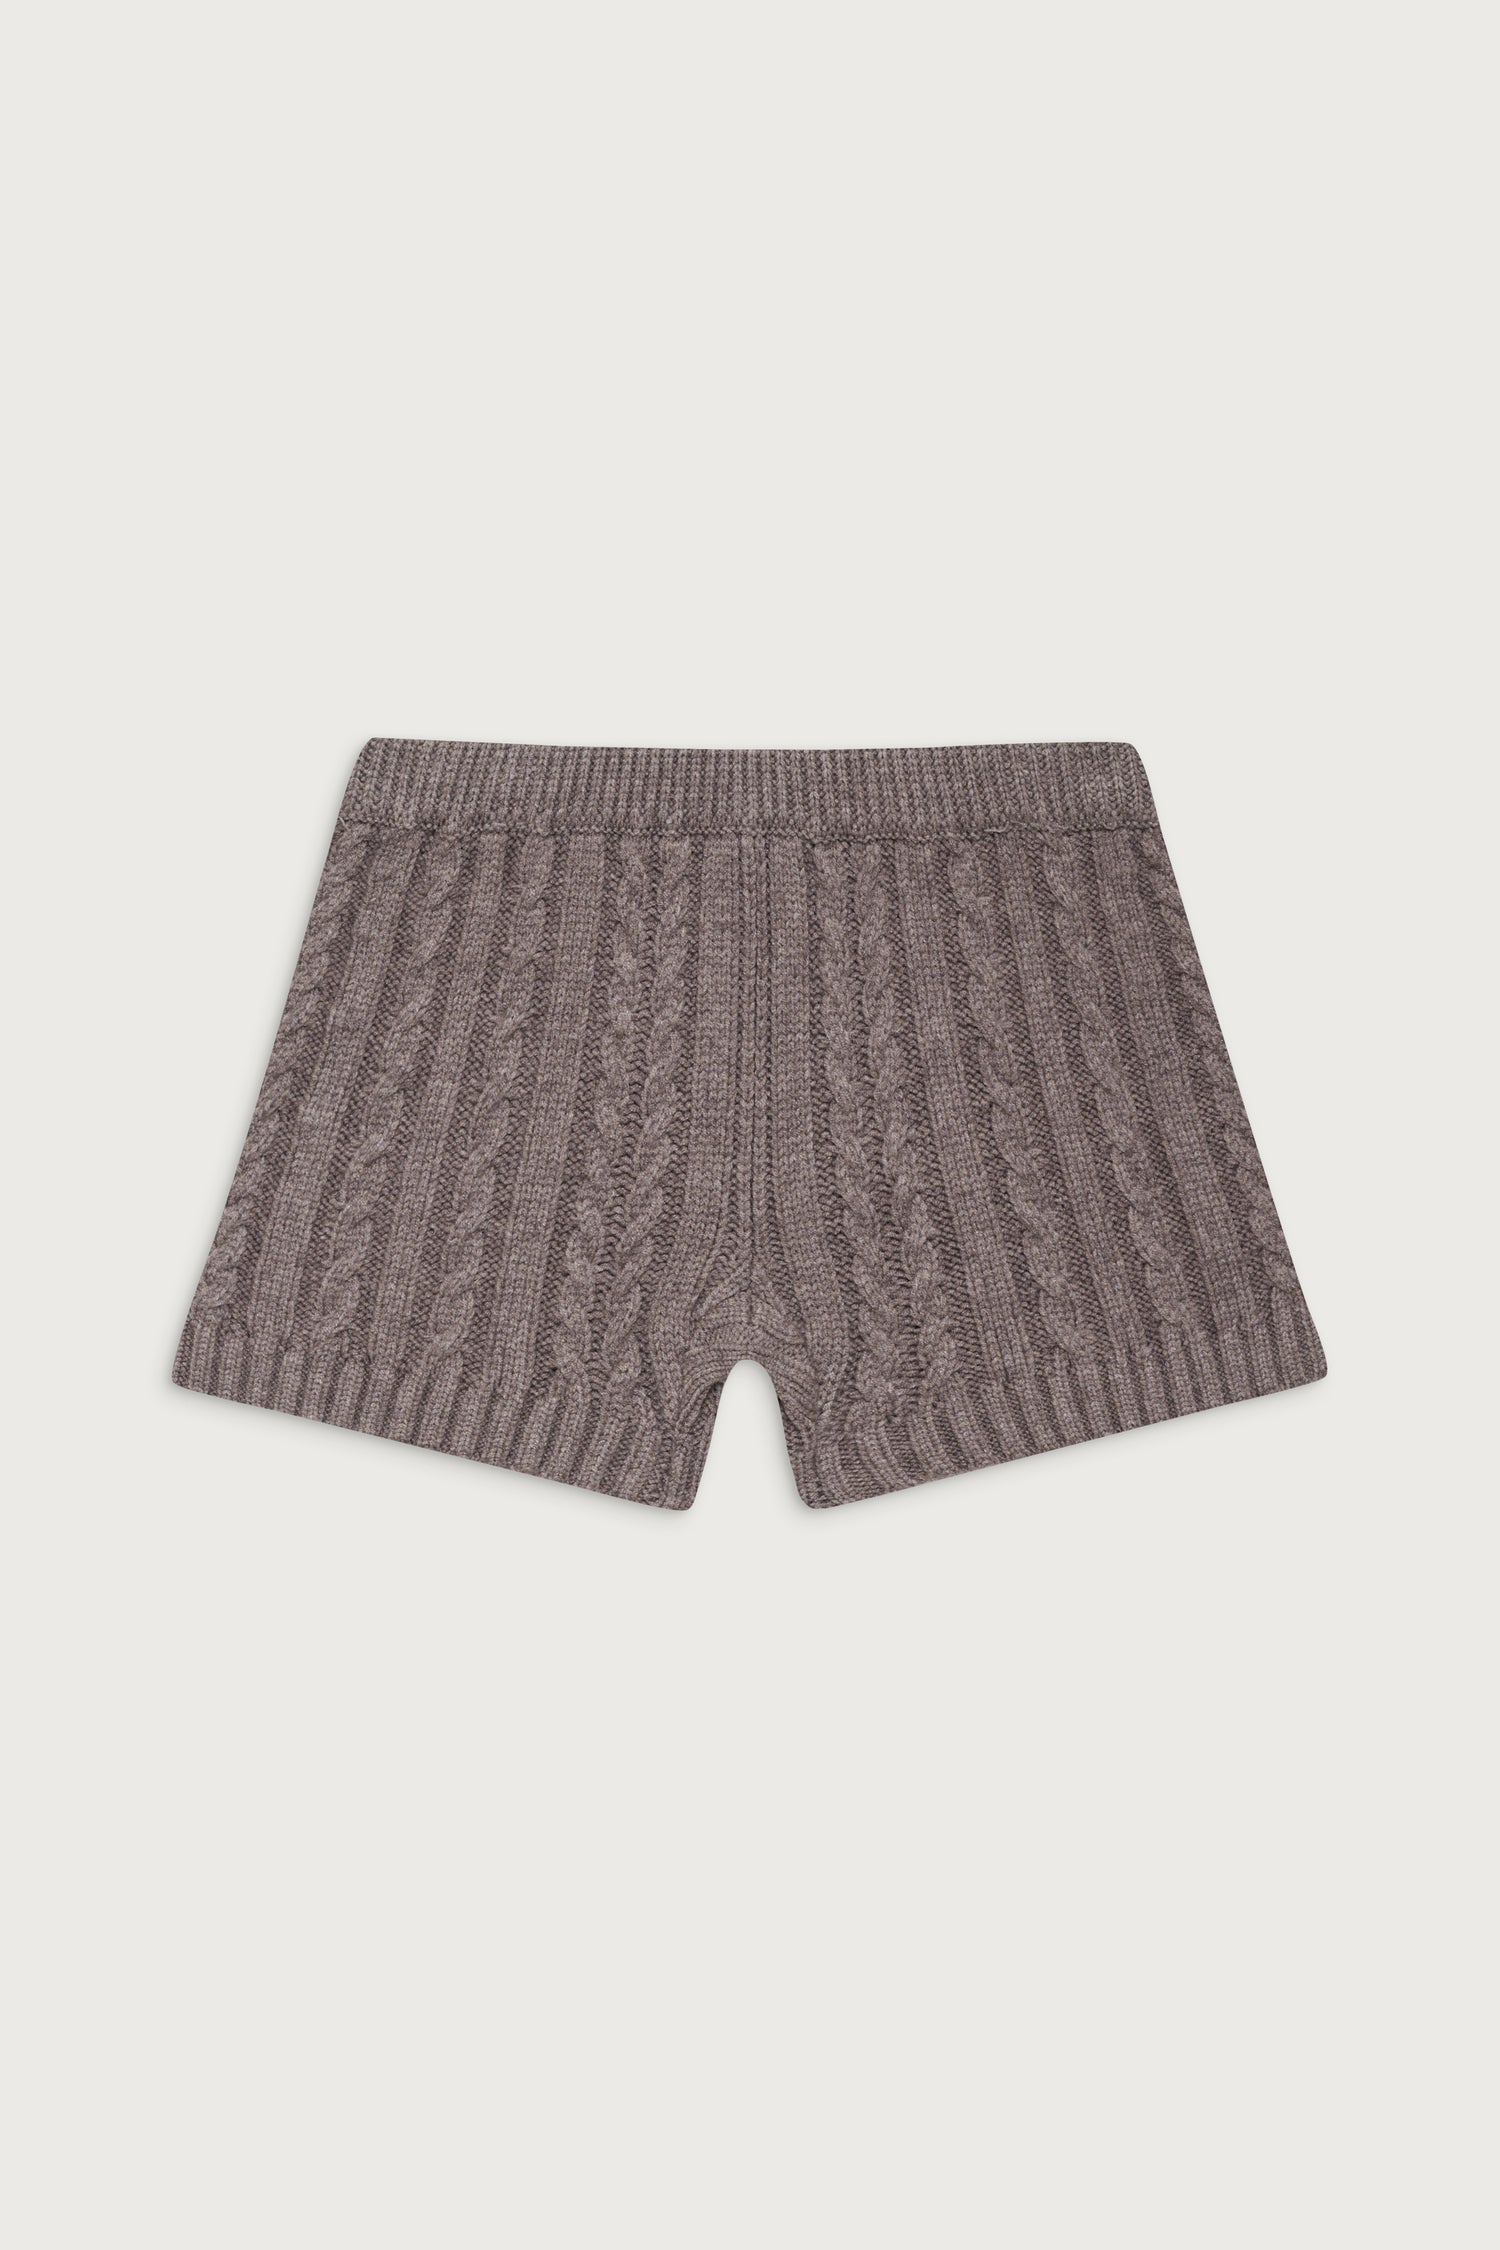 Evermore Cable Cloud Knit Micro Short - Dark Pearl